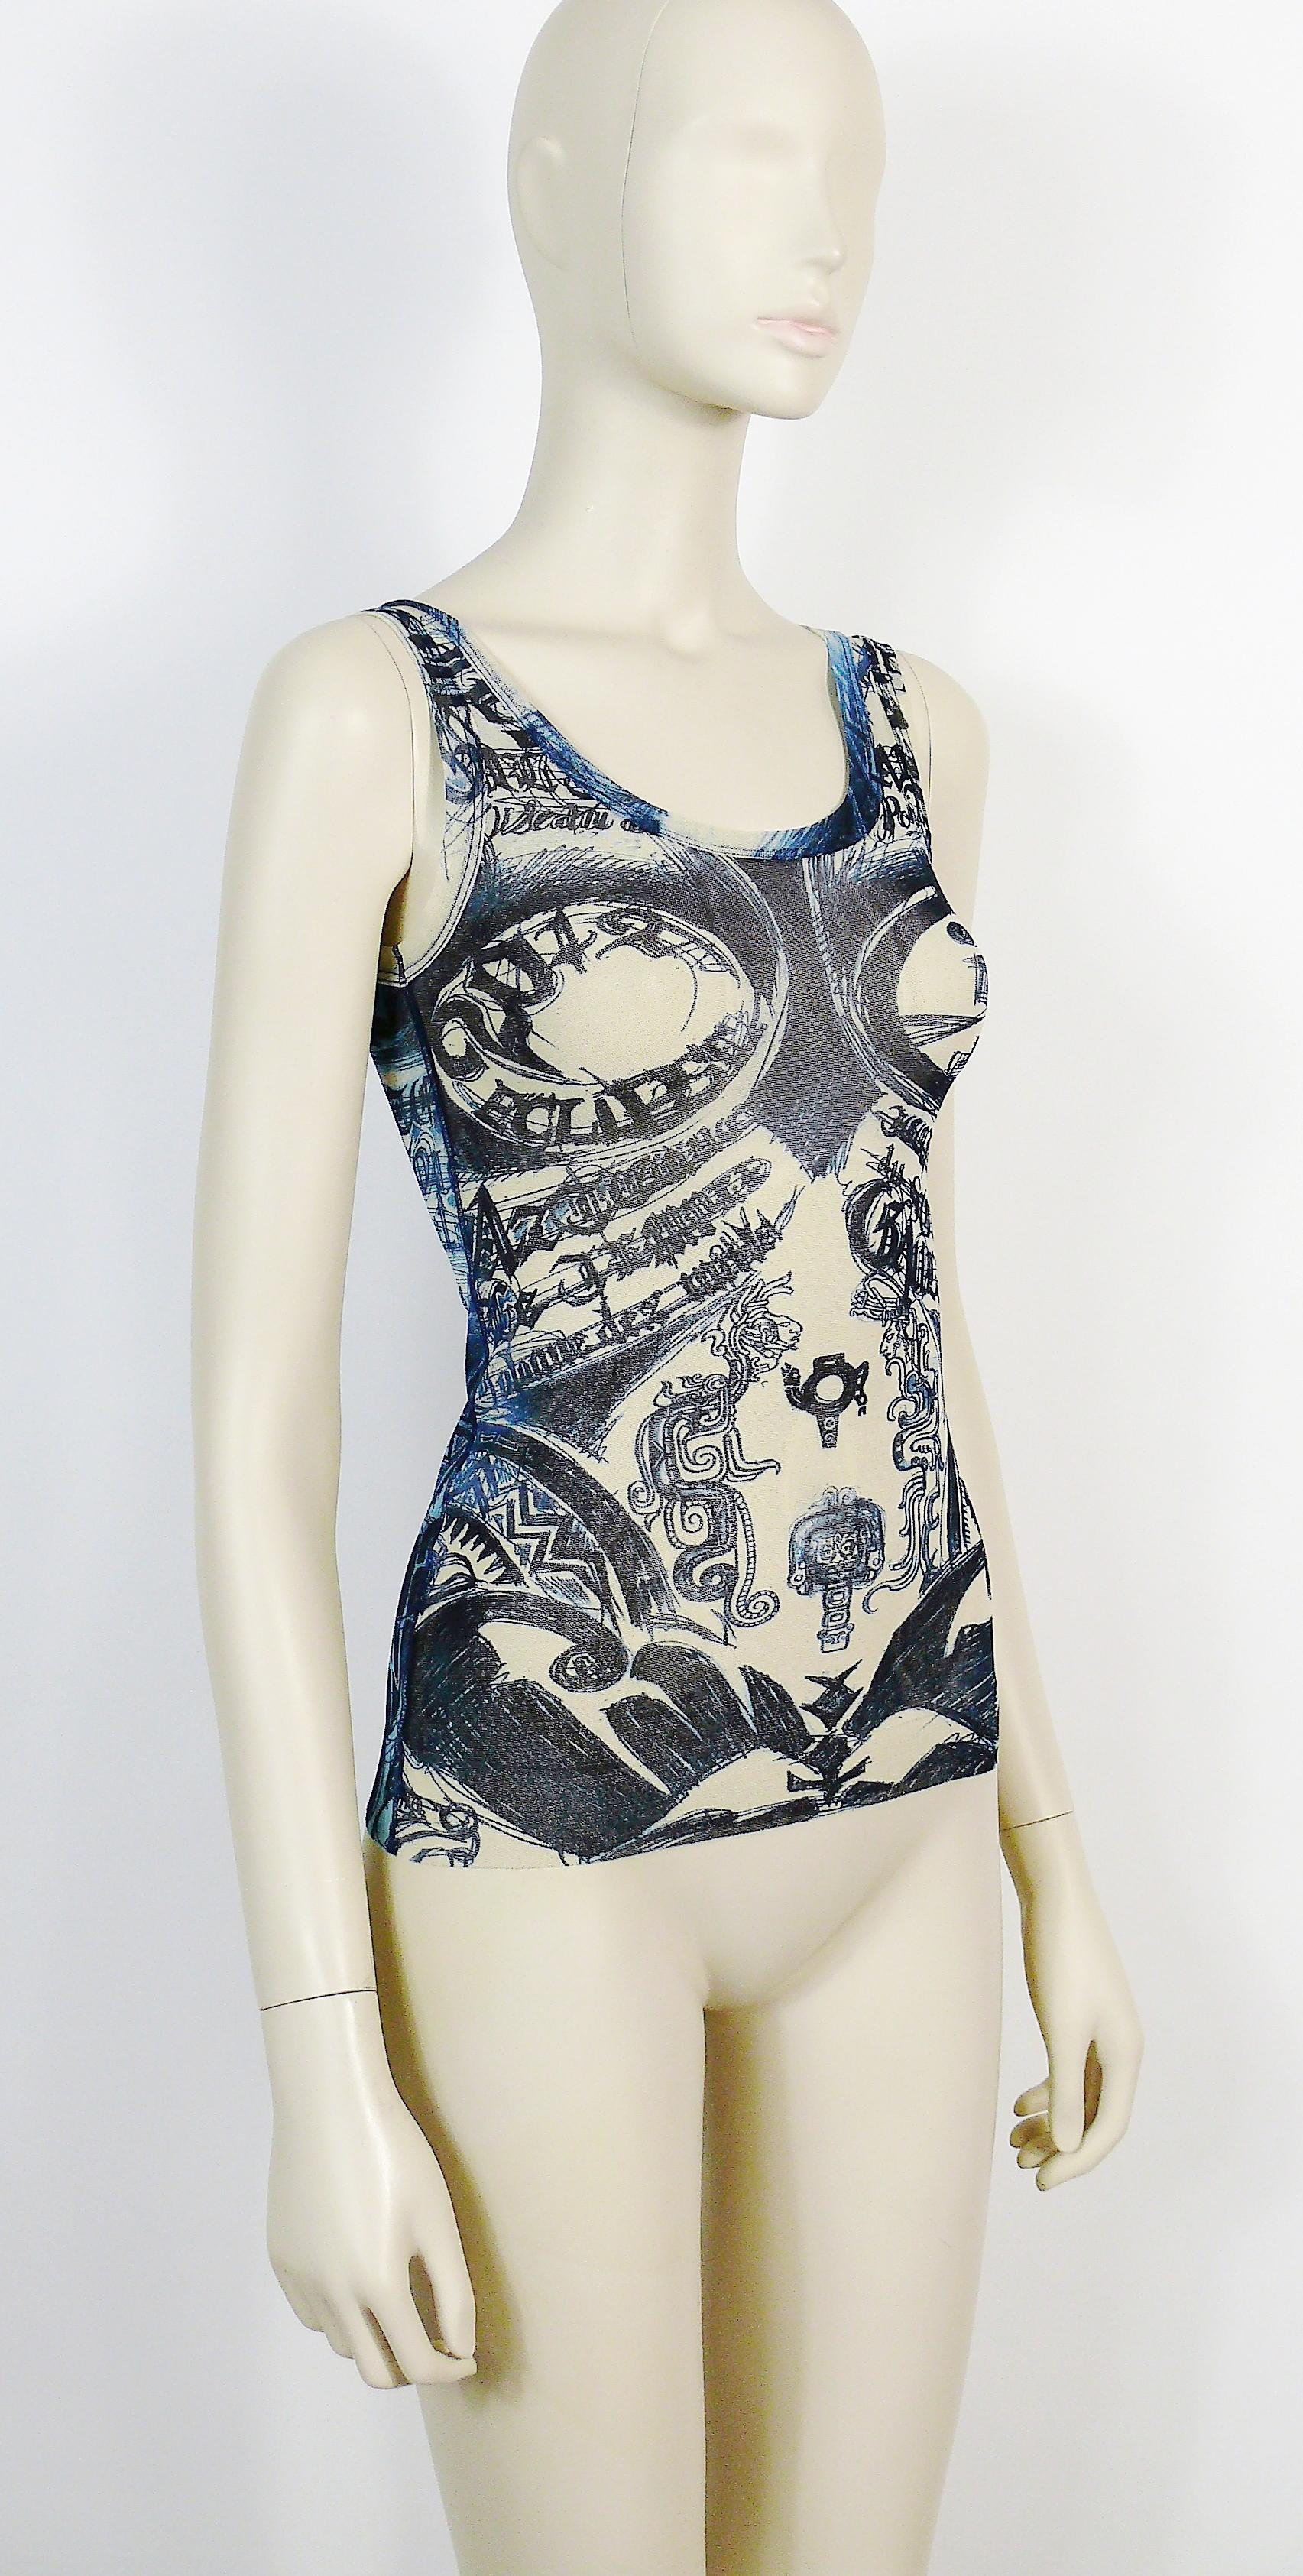 JEAN PAUL GAULTIER sheeer mesh tank top featuring a blue Mayas tattoo print body illusion with 2012 Eclipse messages.

Label reads JEAN PAUL GAULTIER SOLEIL.
Made in Italy.

Size label reads : XS.
Please check measurements.

Composition tag reads :